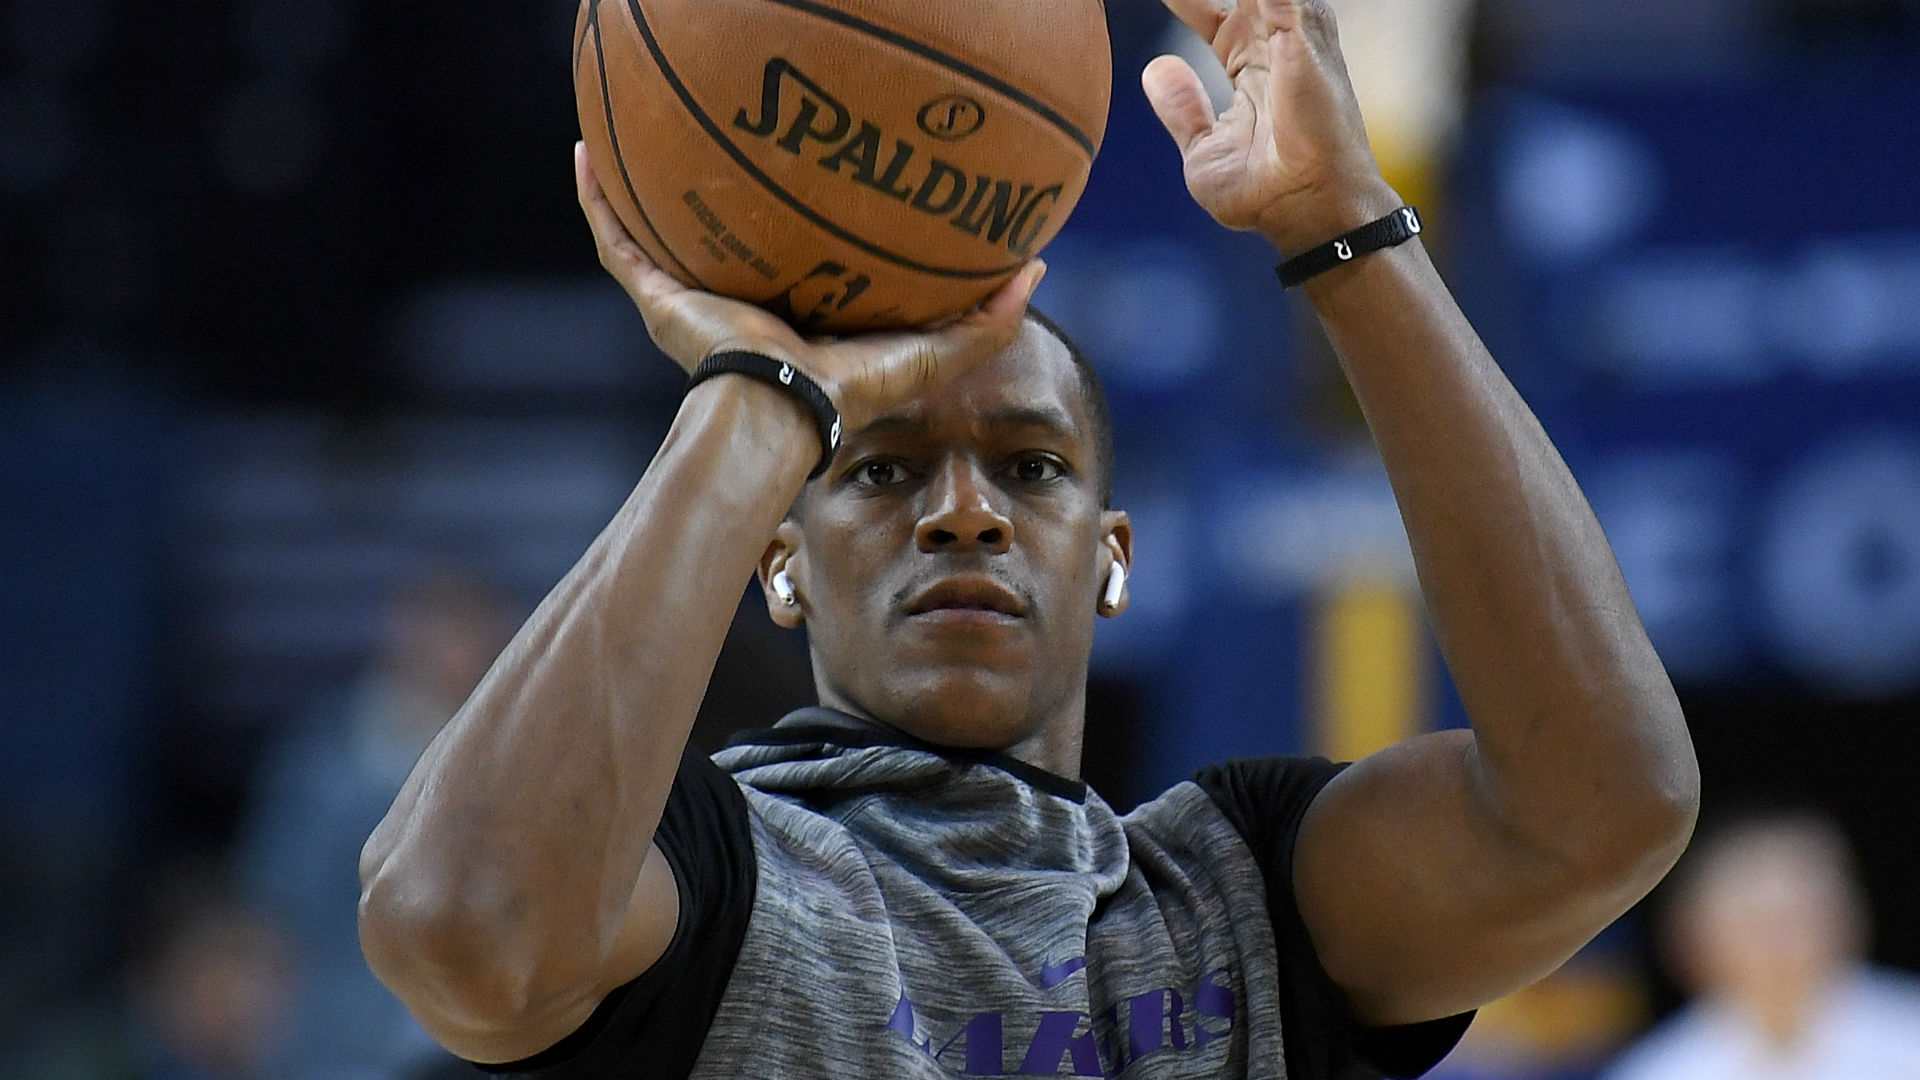 Report: Los Angeles Lakers guard Rajon Rondo to undergo surgery on his right hand ...